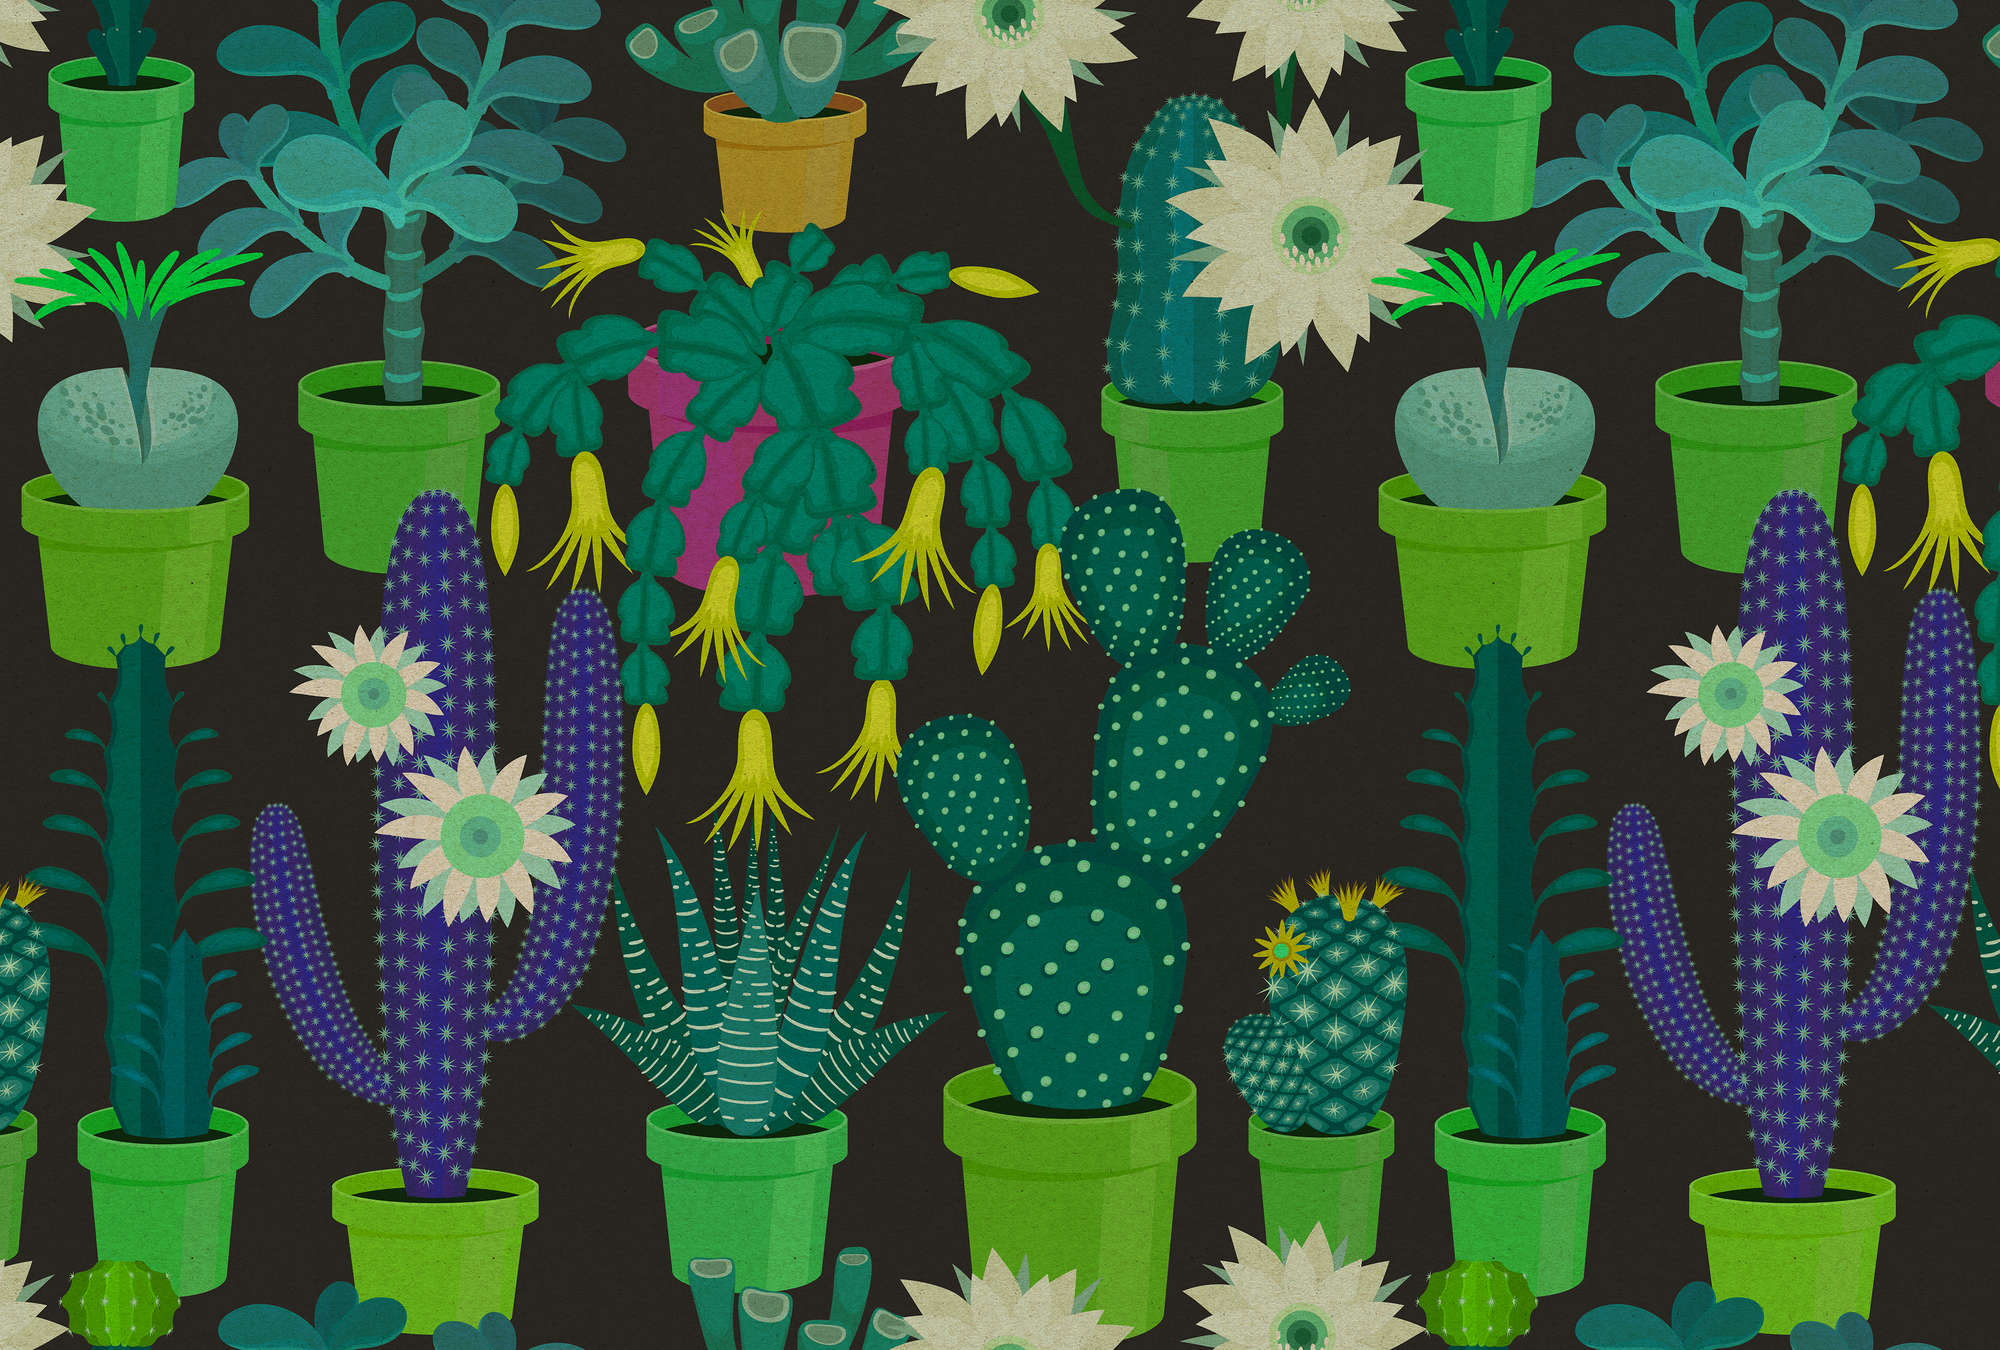             Cactus garden 2 - Photo wallpaper with colourful cacti in comic style in cardboard structure - Green, Black | Matt smooth fleece
        